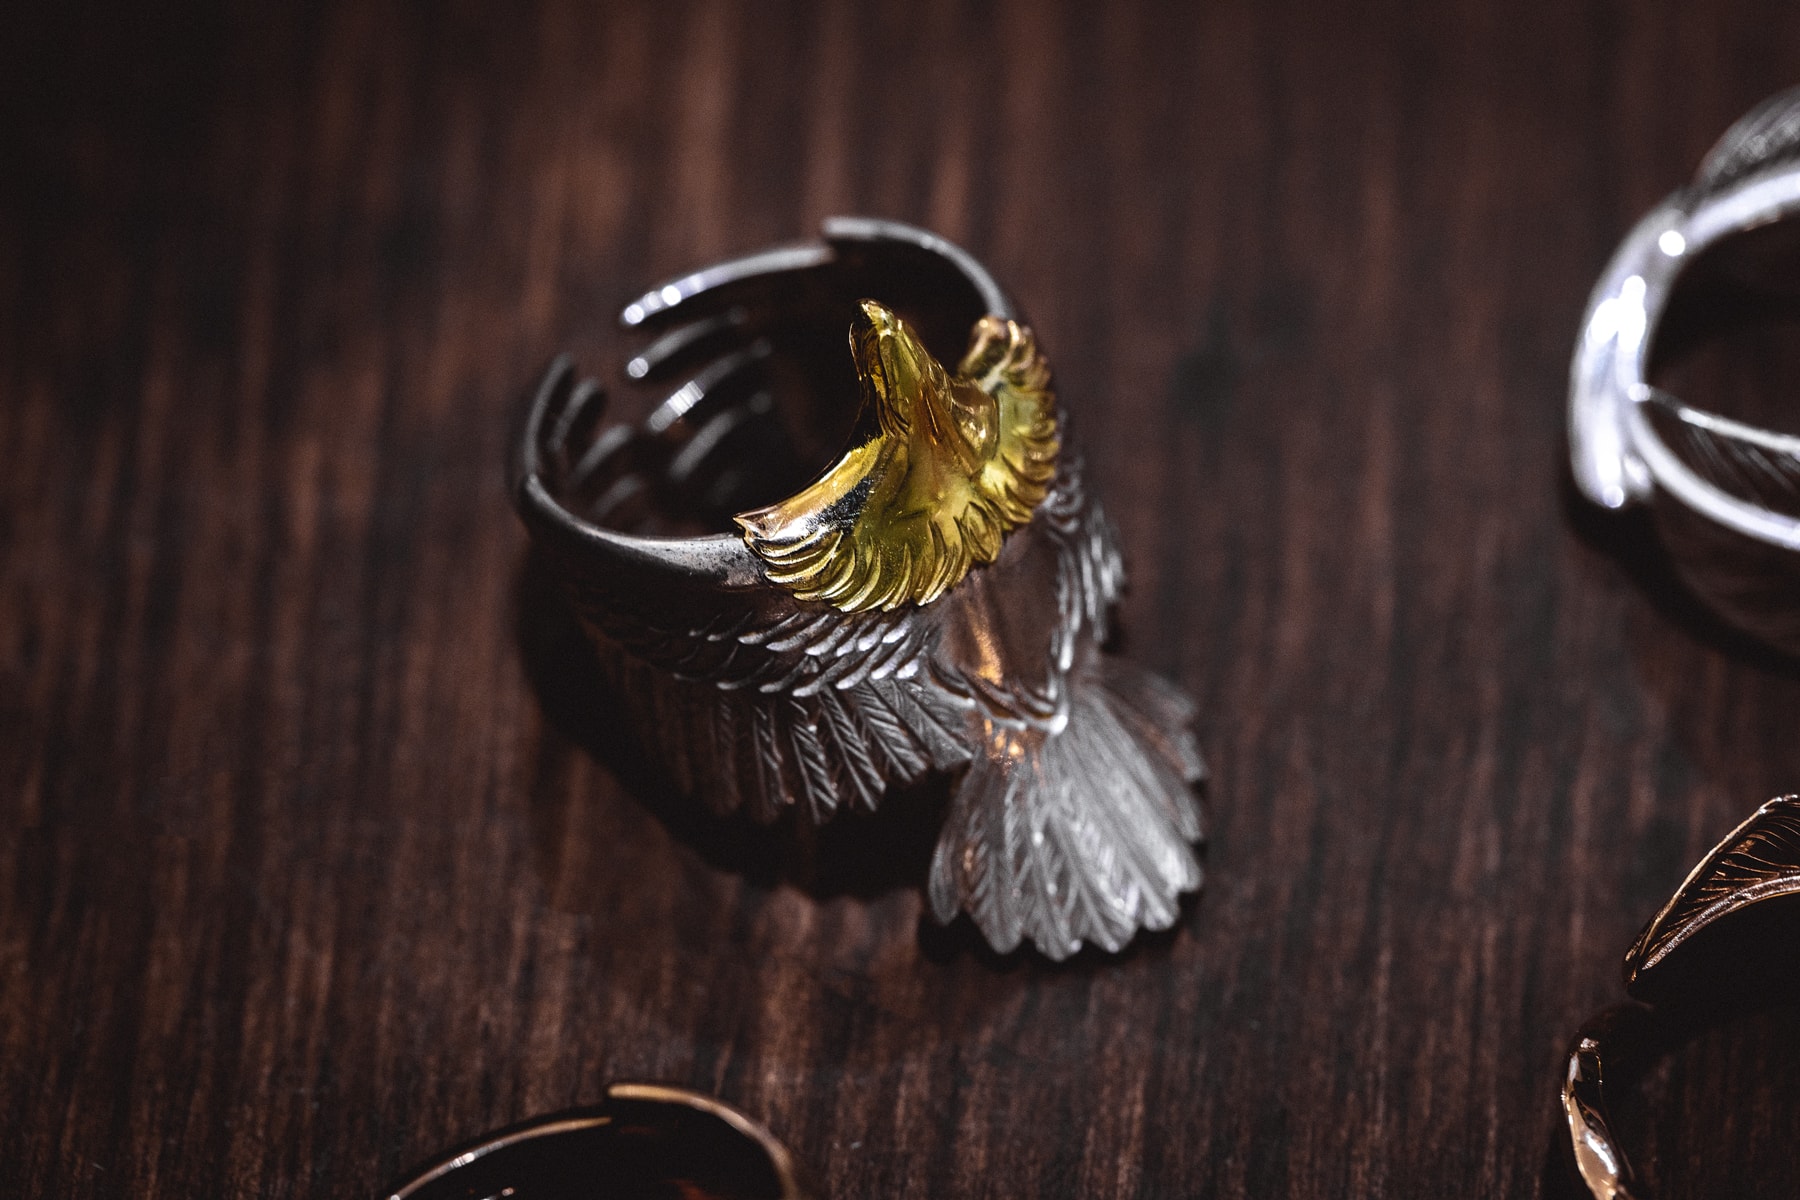 Taro Washimi Native American Silver Jewelry 925 feathers goro's wings claws indian native american jewelry accessories rings bracelets necklaces pendants tokyo Hong Kong Vinavast 